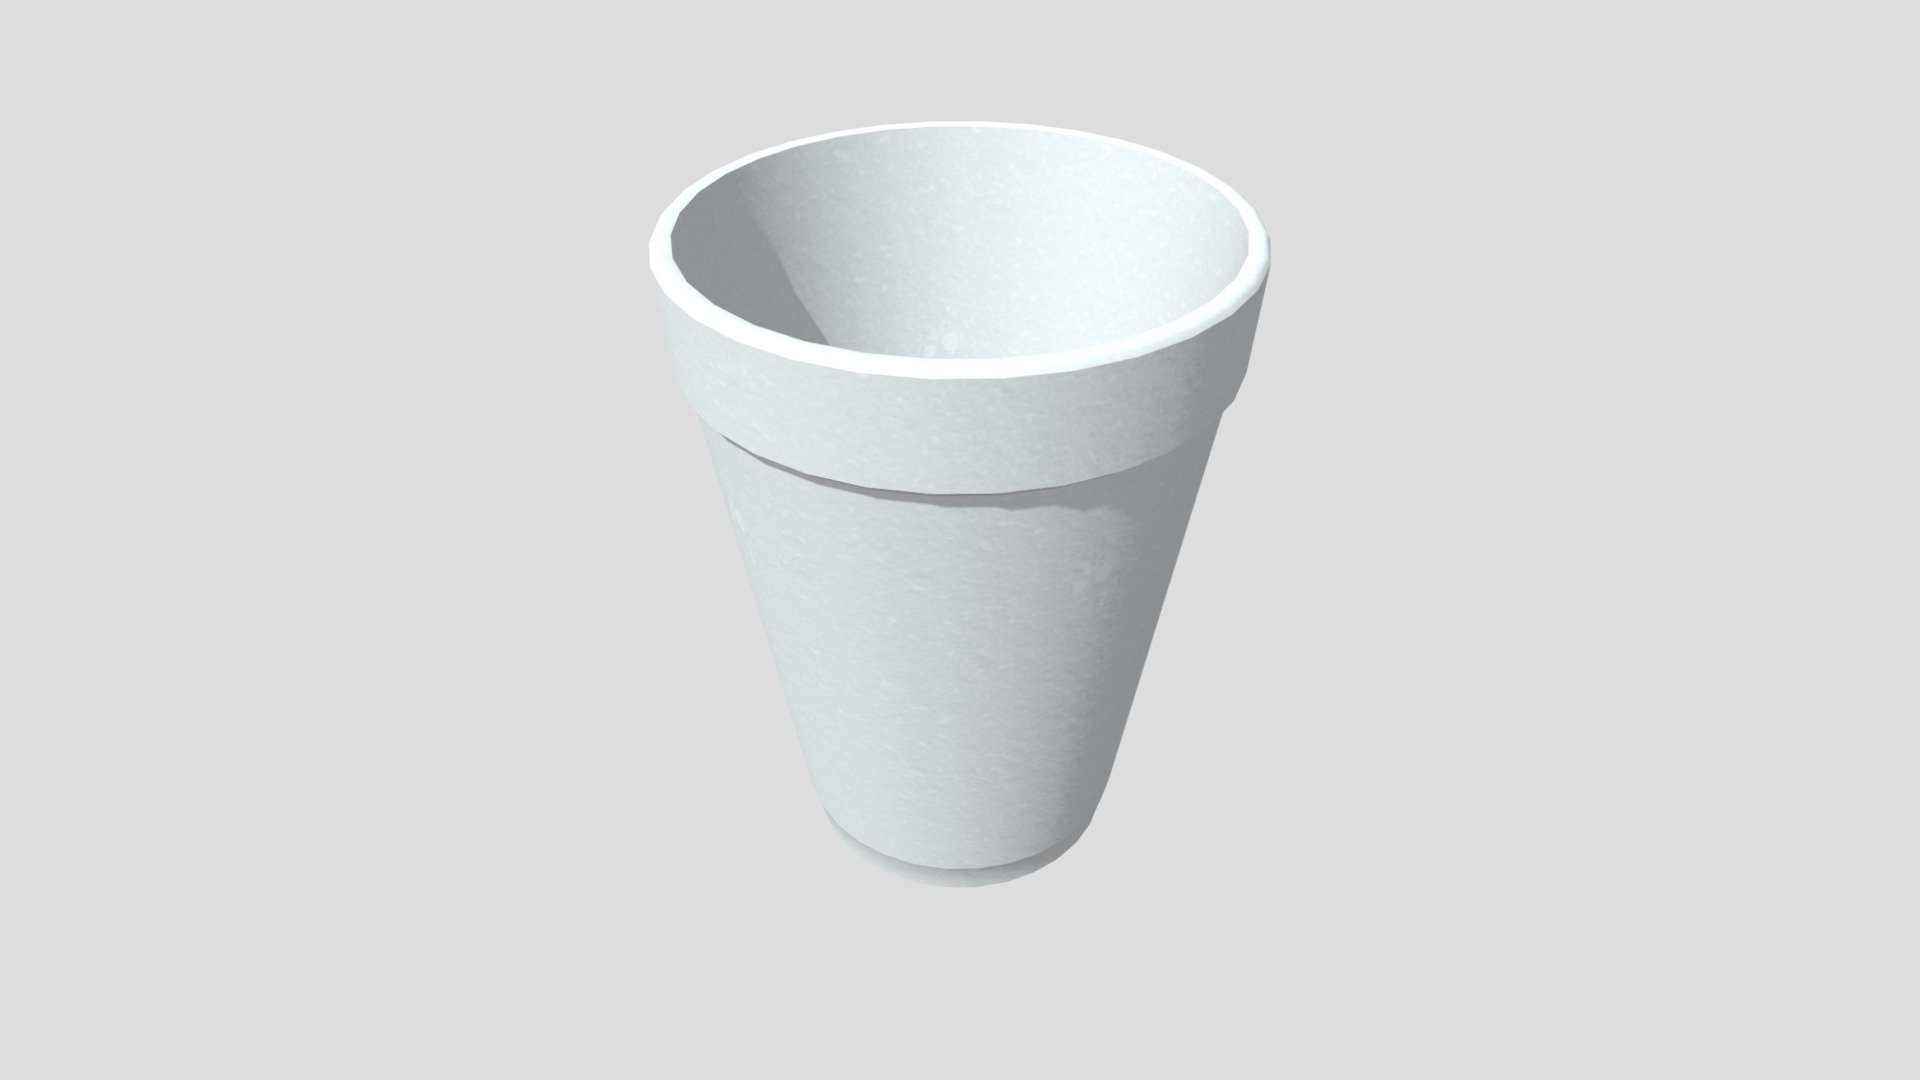 This Styrofoam Cup is Viewable from all angles and Distances. The texturing is photoreal and has the white marbling that foam has. Perfect for decoration, music videos, etc.

This Includes:

The Mesh
-4K and 2K Texture Set (Albedo, Roughness, Normal, Height)

The Mesh is UV Unwrapped and can easily be retextured 3d model